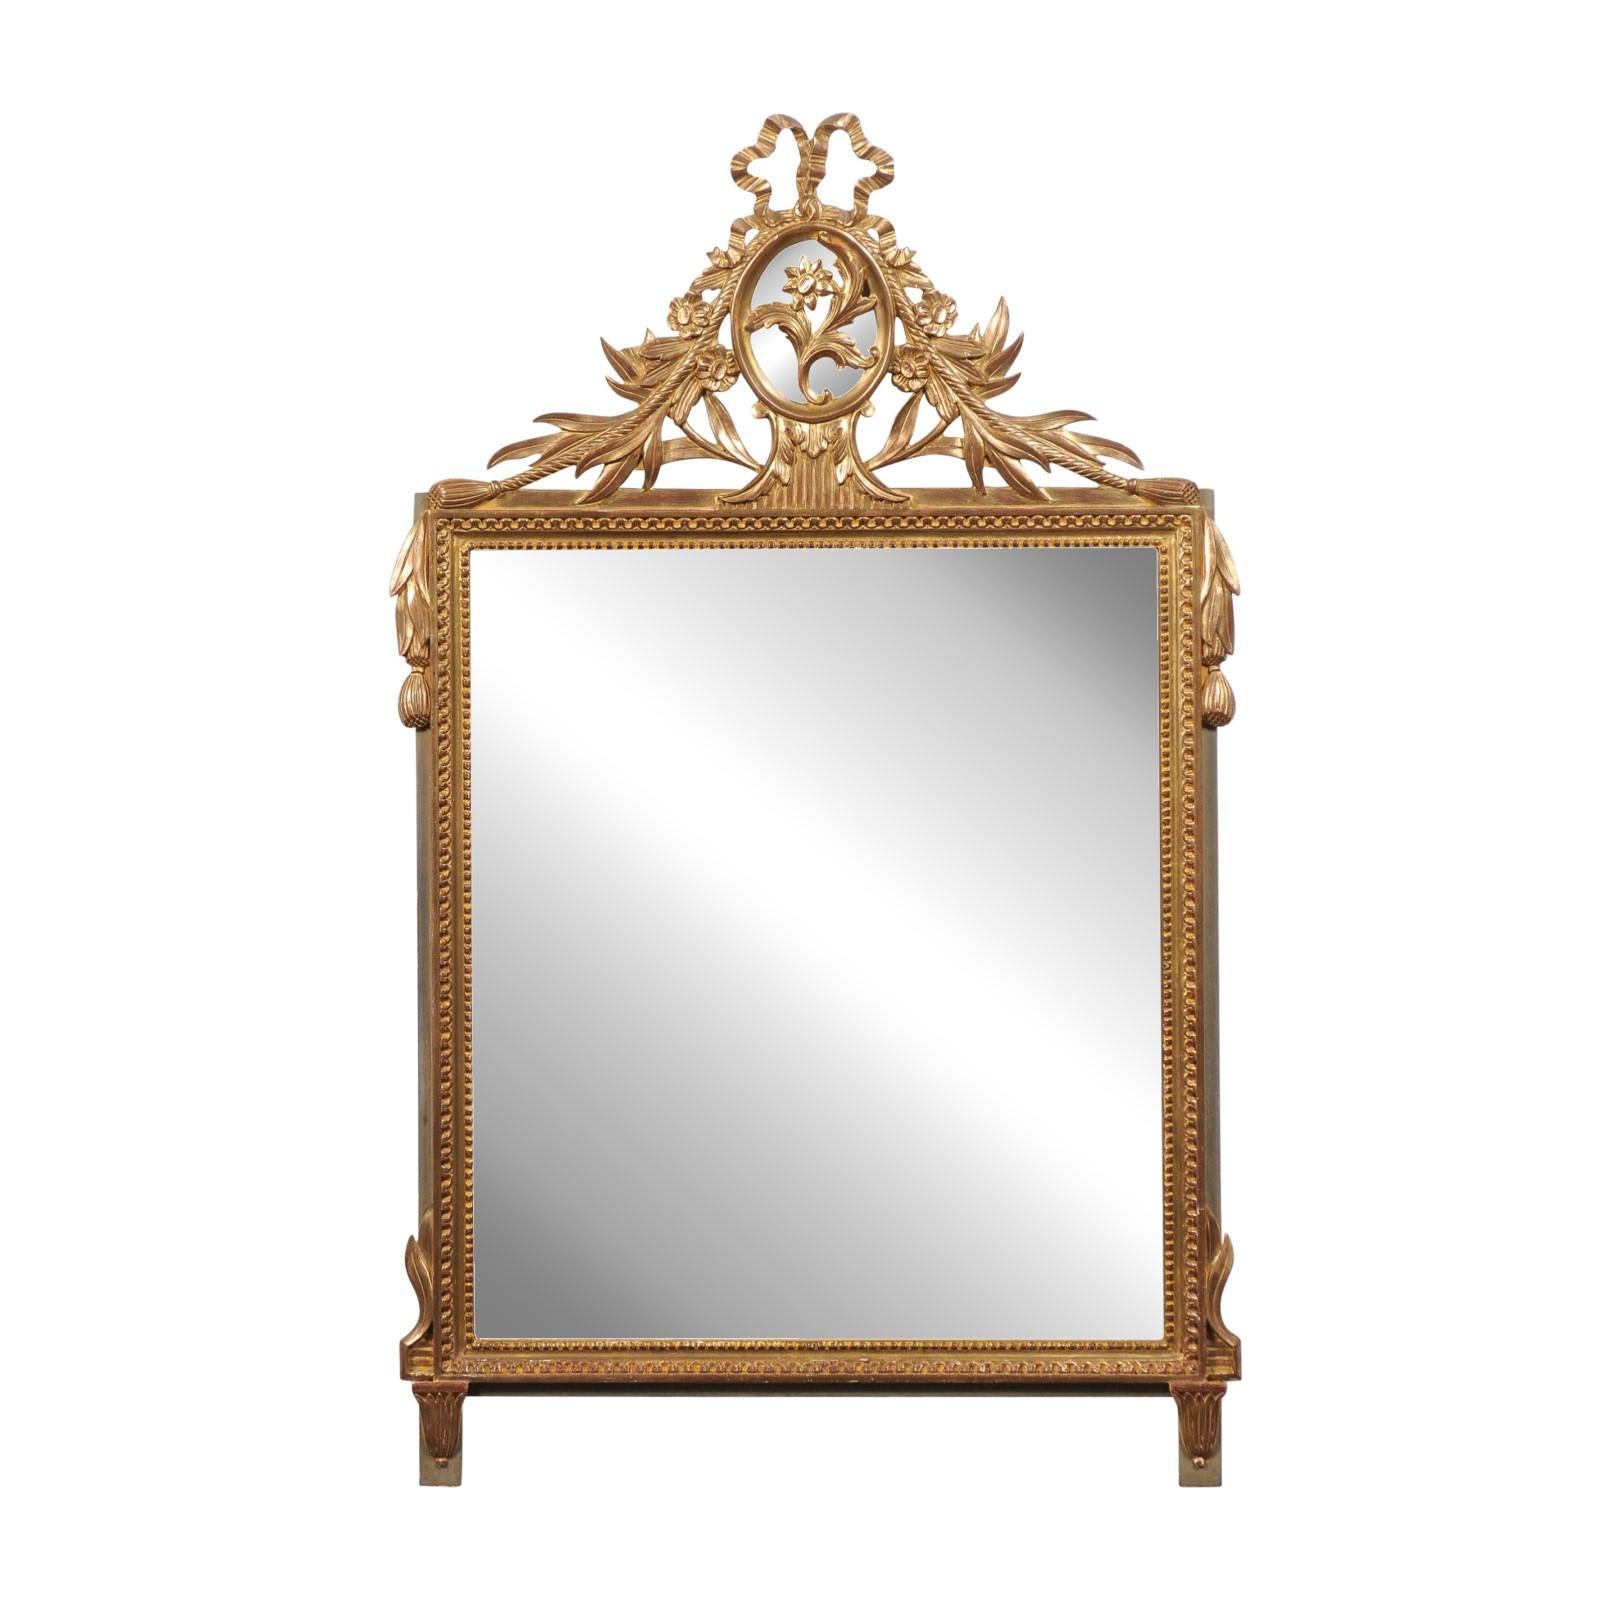 A French Louis XVI style gilded wood mirror from the 20th century with ribbon-tied floral medallion, petite carved beads and tassels. Exuding the grace and grandeur of French craftsmanship, this Louis XVI style gilded wood mirror from the 20th